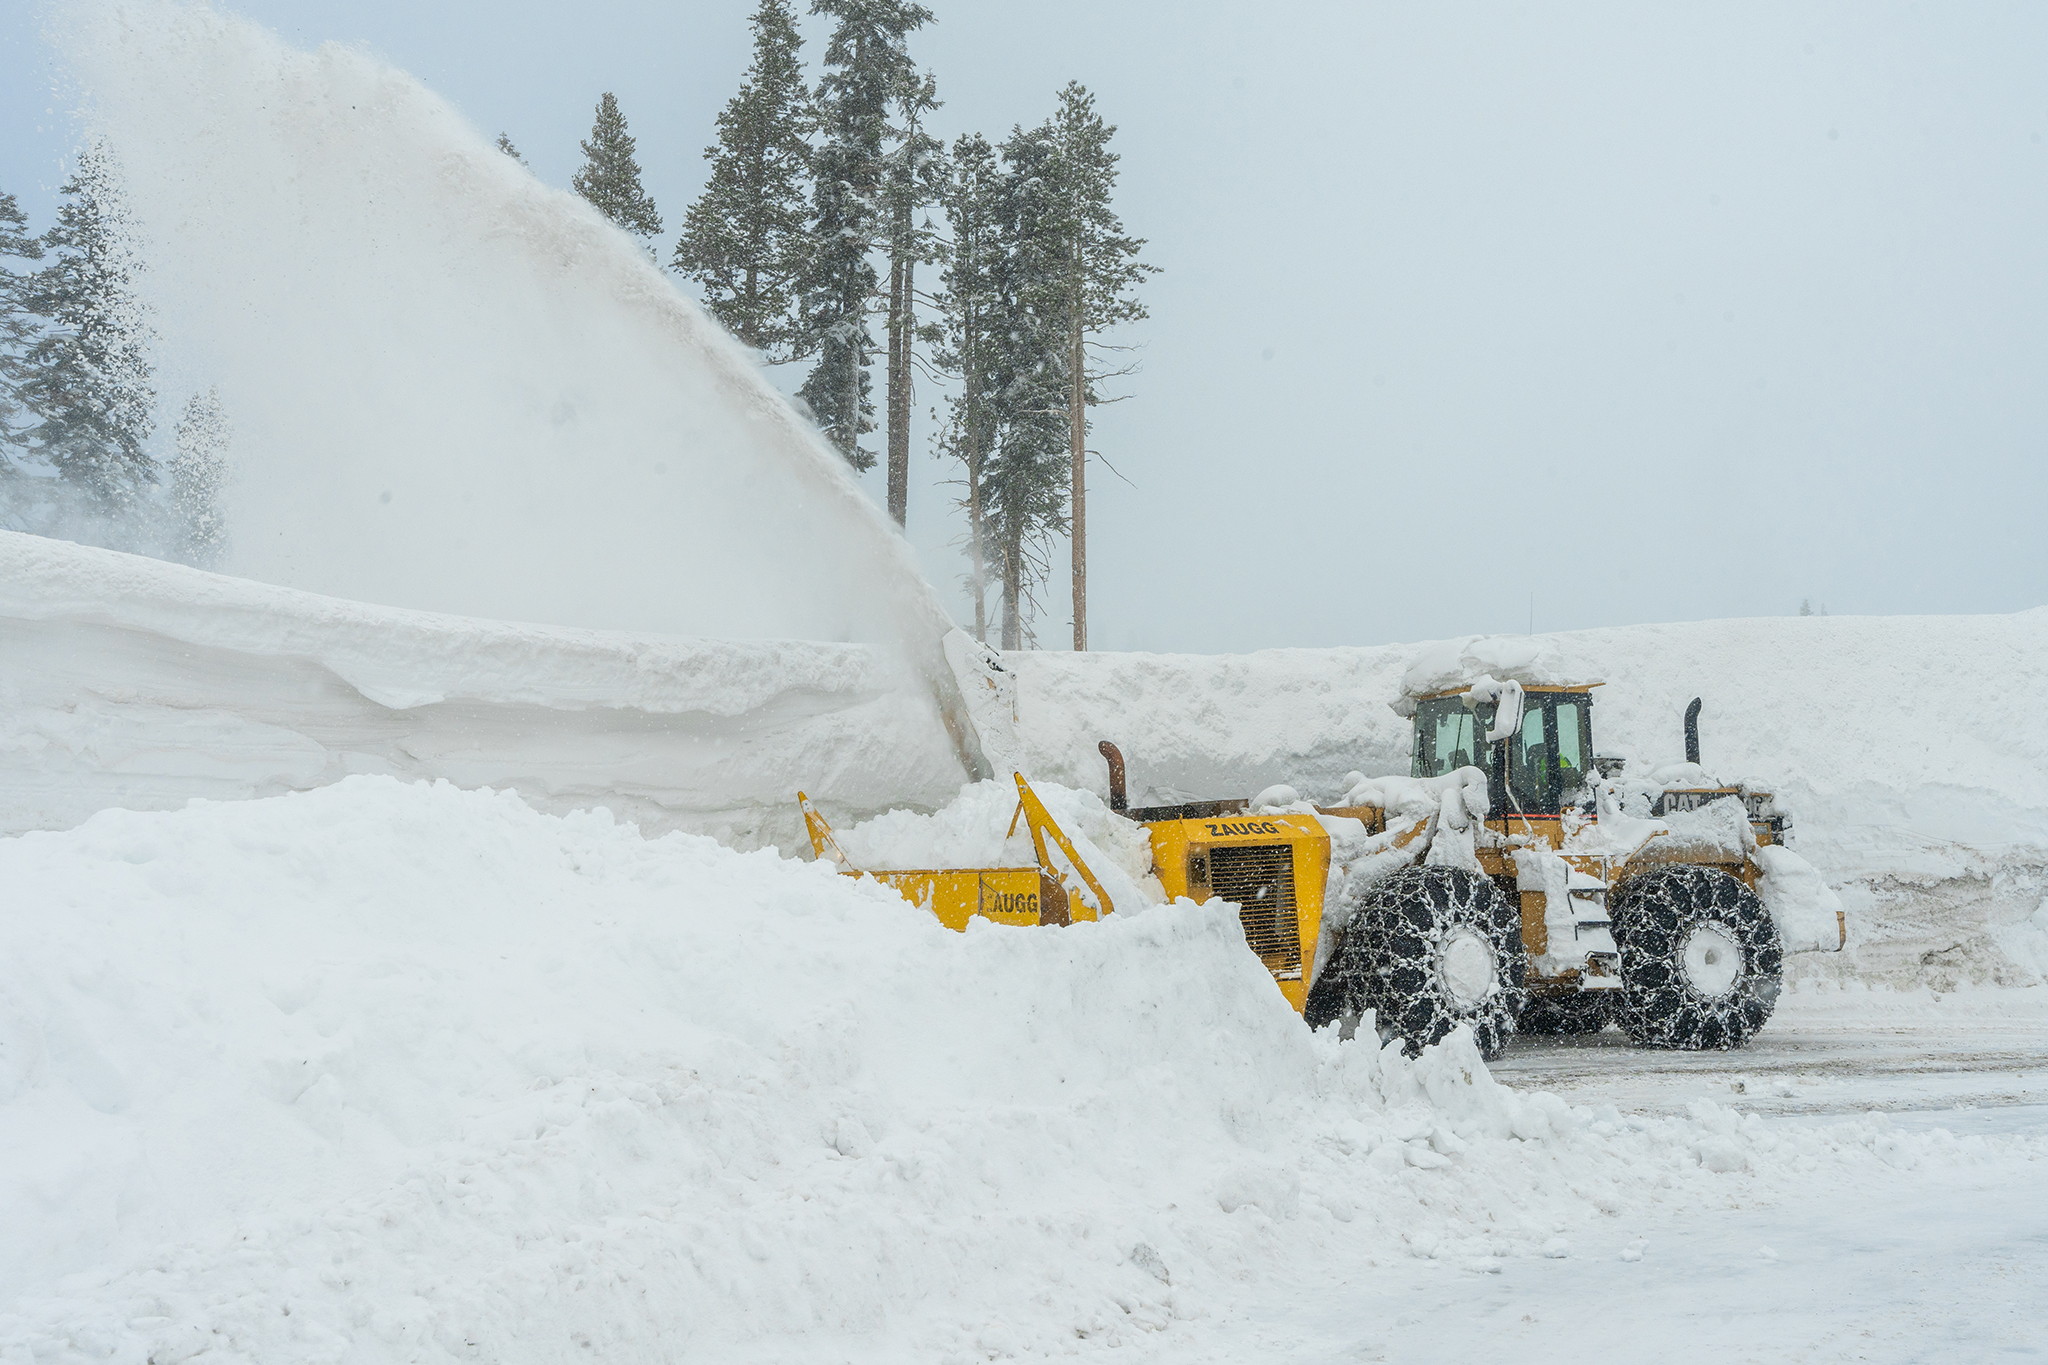 It's officially the snowiest season to date in Lake Tahoe